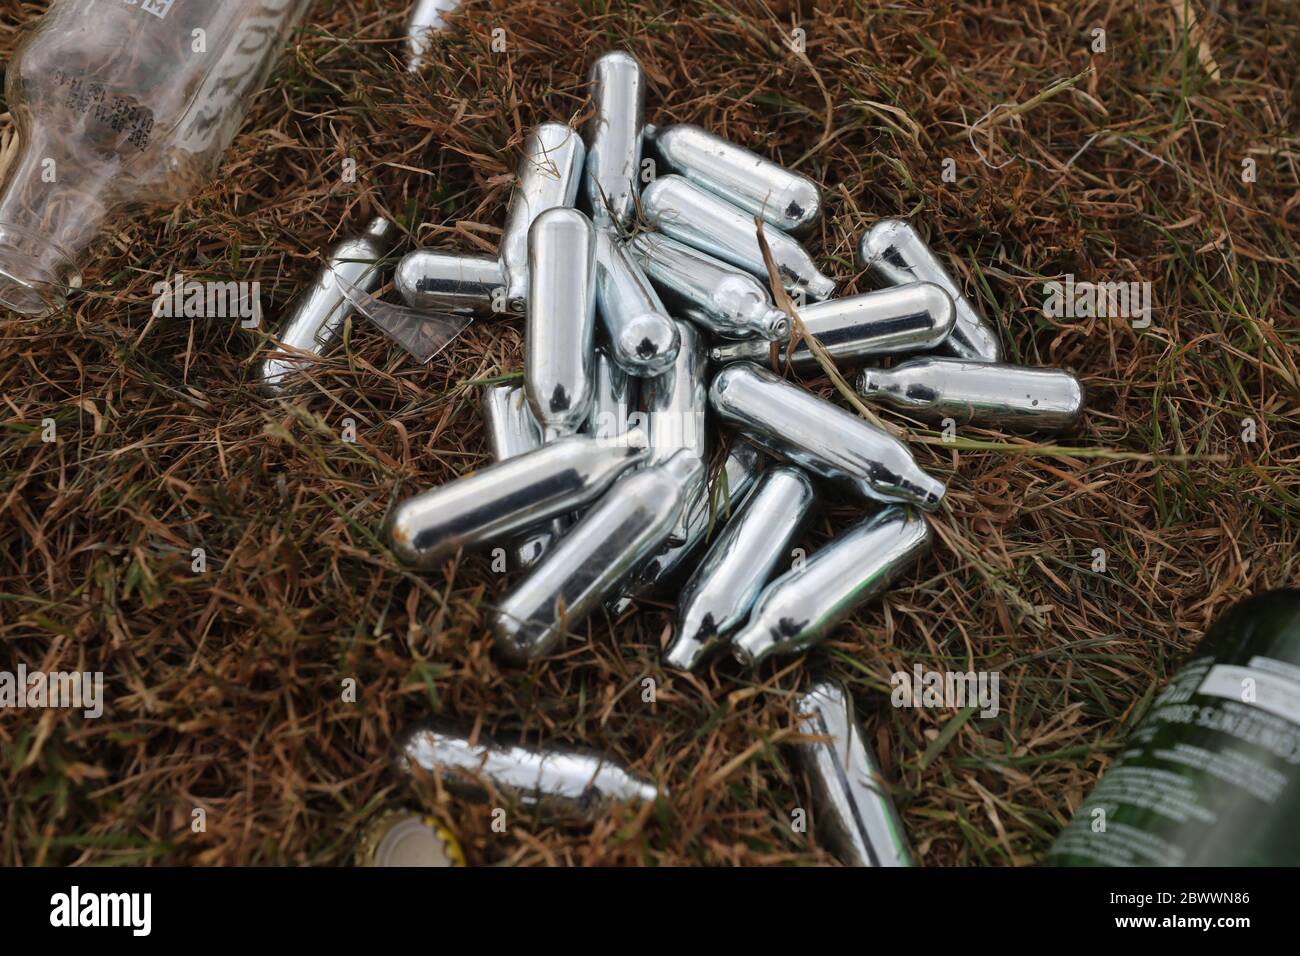 Discard Canisters of nitrous oxide or 'hippie crack' in the Clondalkin area of Dublin. Stock Photo